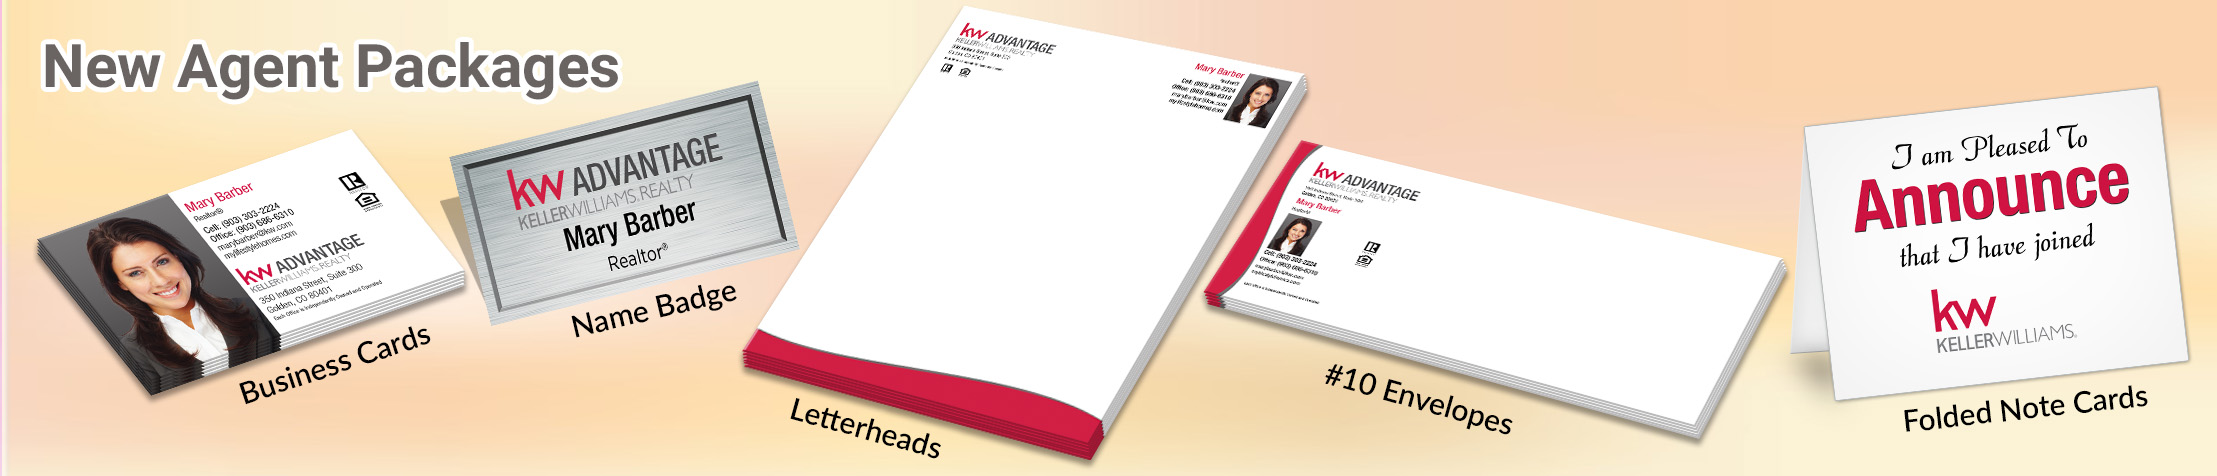 Keller Williams Real Estate Gold, Silver and Bronze Agent Packages - KW approved vendor personalized business cards, letterhead, envelopes and note cards | BestPrintBuy.com